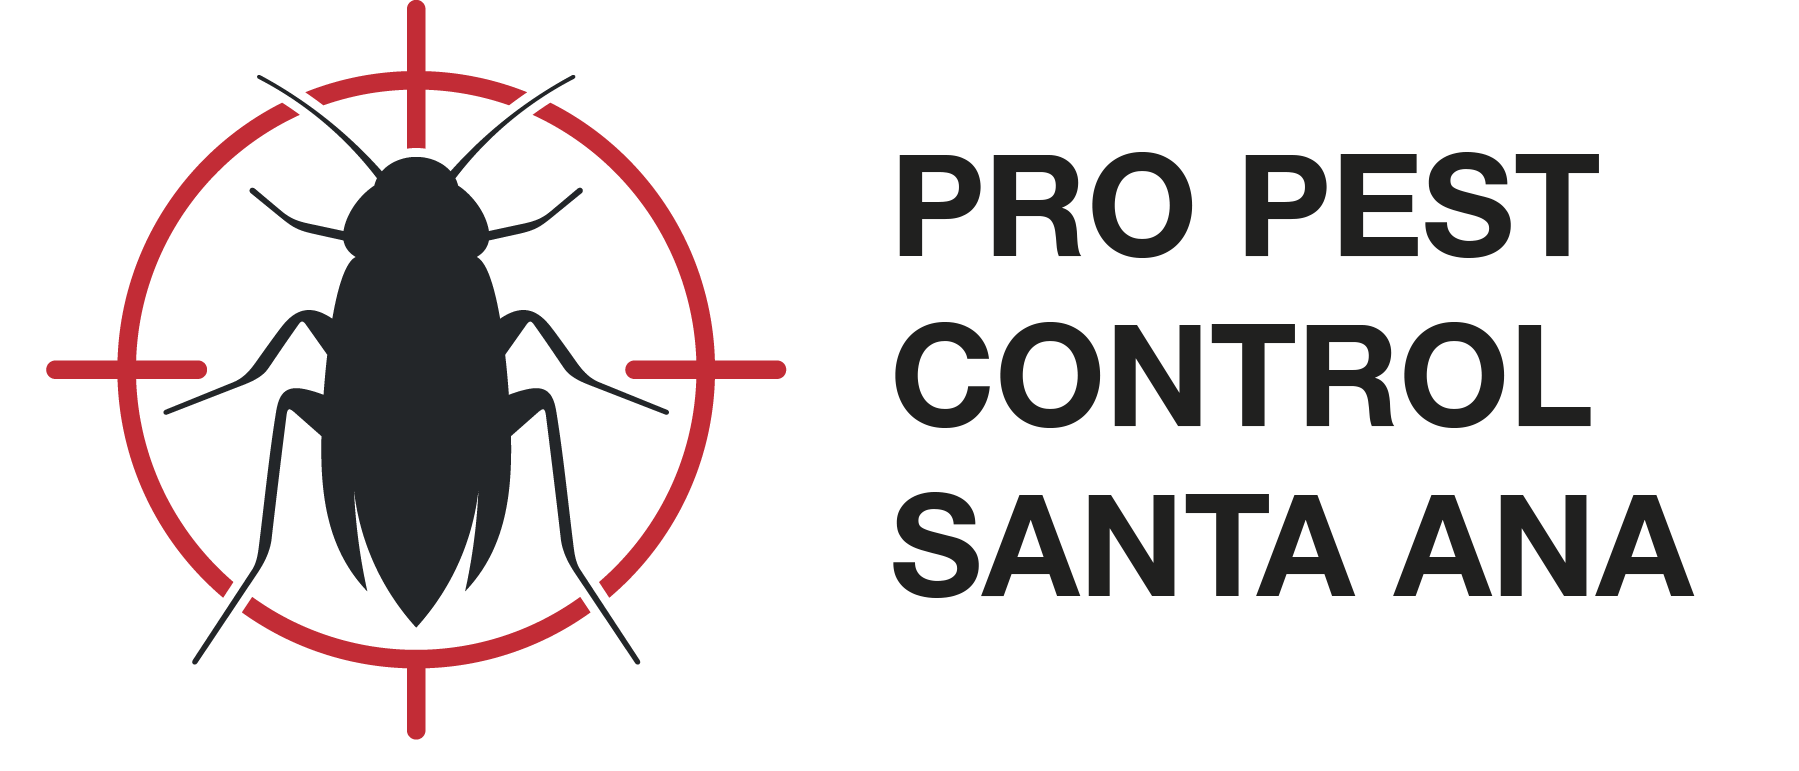 Pro Pest Control Santa Ana, a Highly-Rated Pest Control Company in Santa Ana, CA Announces New Website